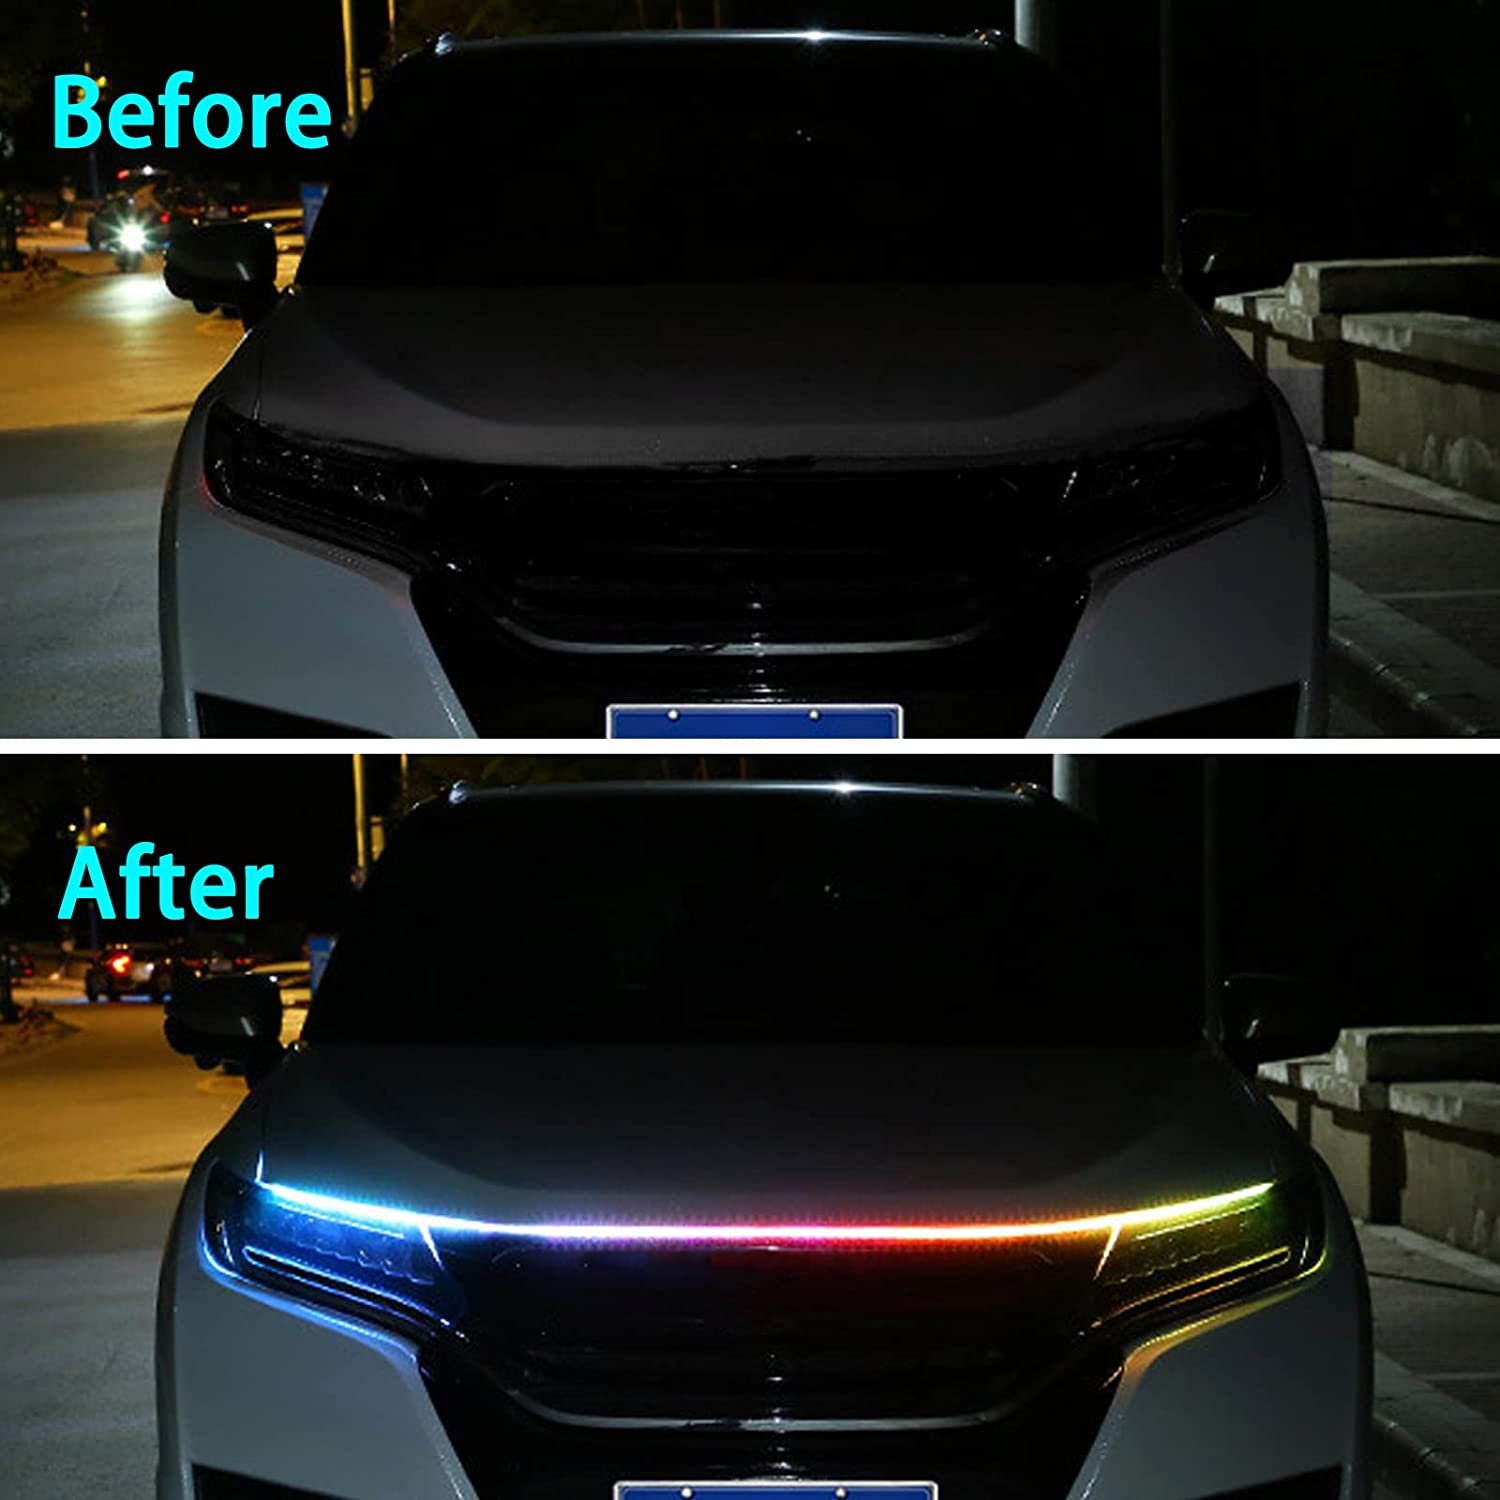 70 Inches Flexible Waterproof Car Hood Strip Led Light, APP and Remote Control Daytime Running Light for Cars, SUVs,Trucks Image 